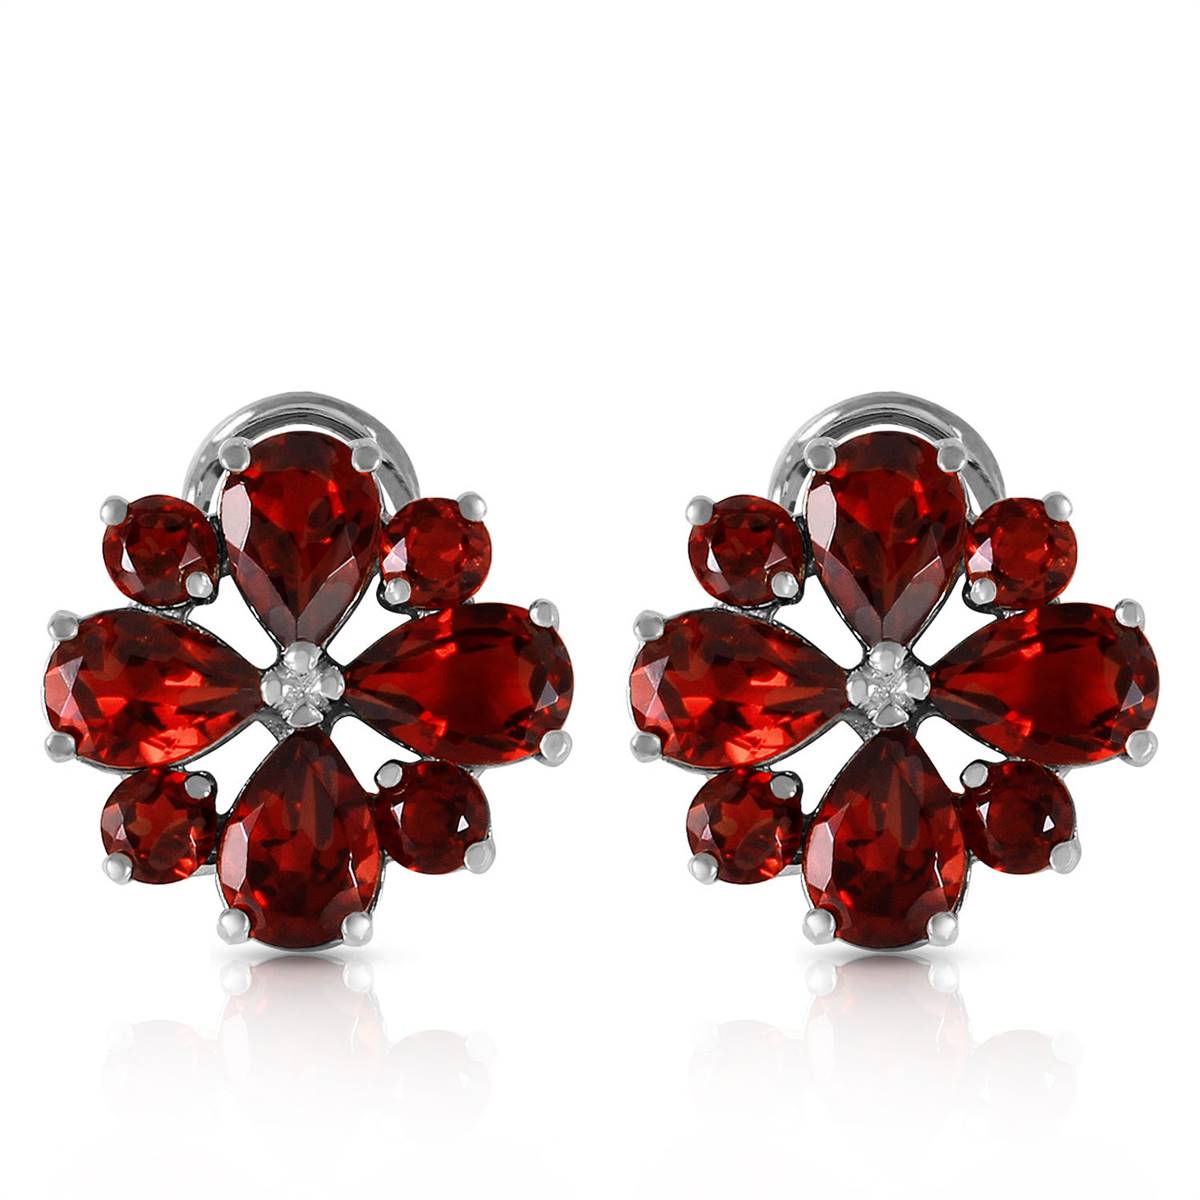 4.85 Carat 14K Solid White Gold Sultry Touch Garnet Earrings